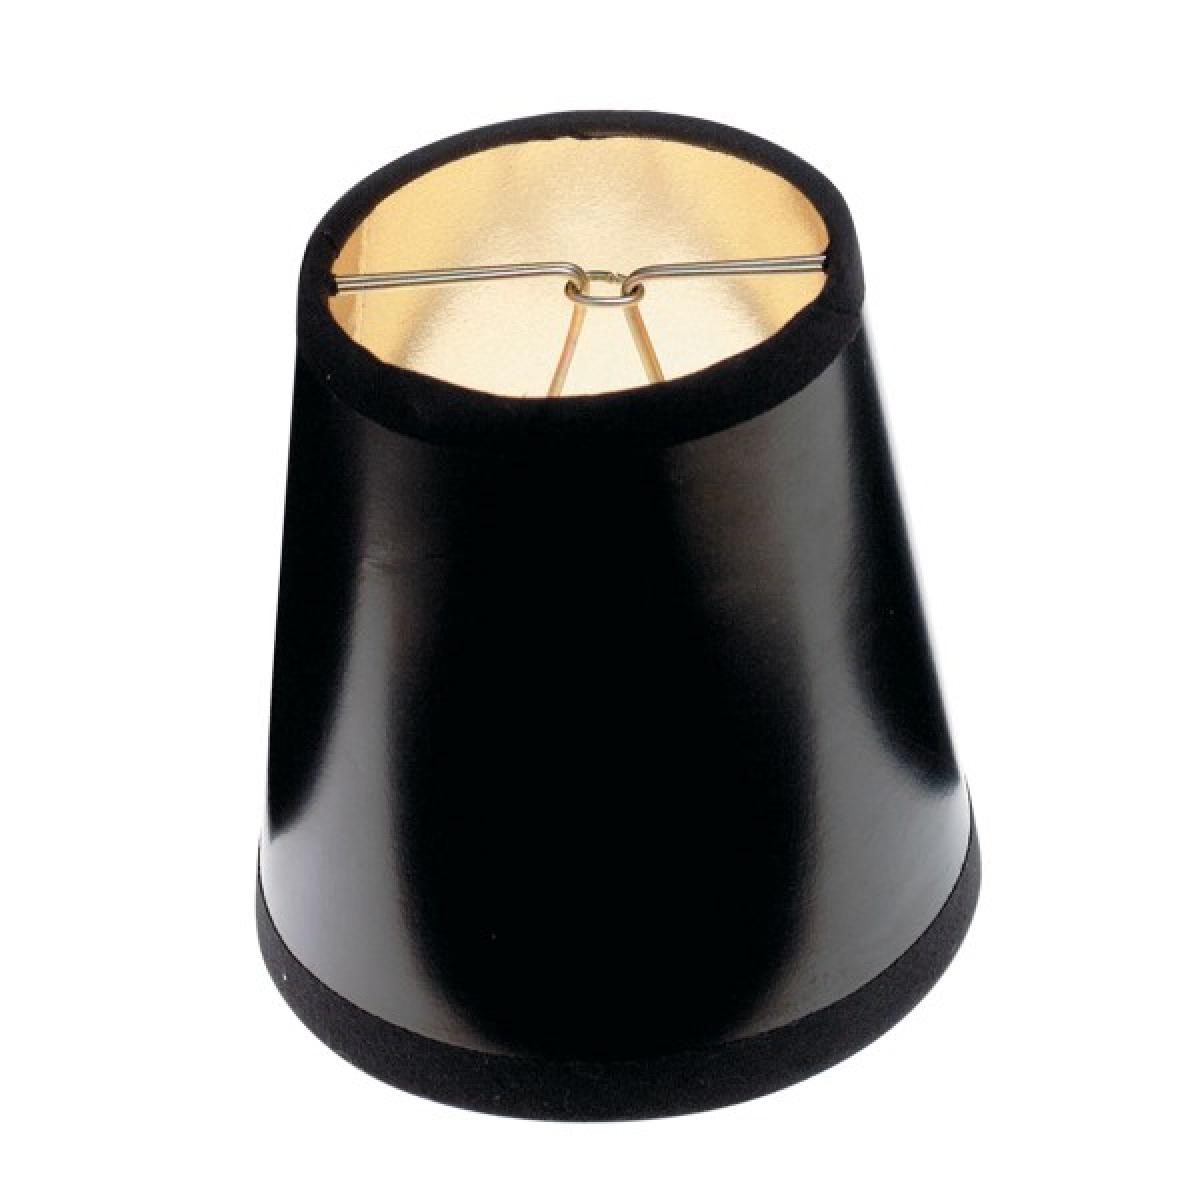 Satco 90-1274 Clip On Shade Black Round With Gold Interior 3" Top 4" Bottom 4" Side